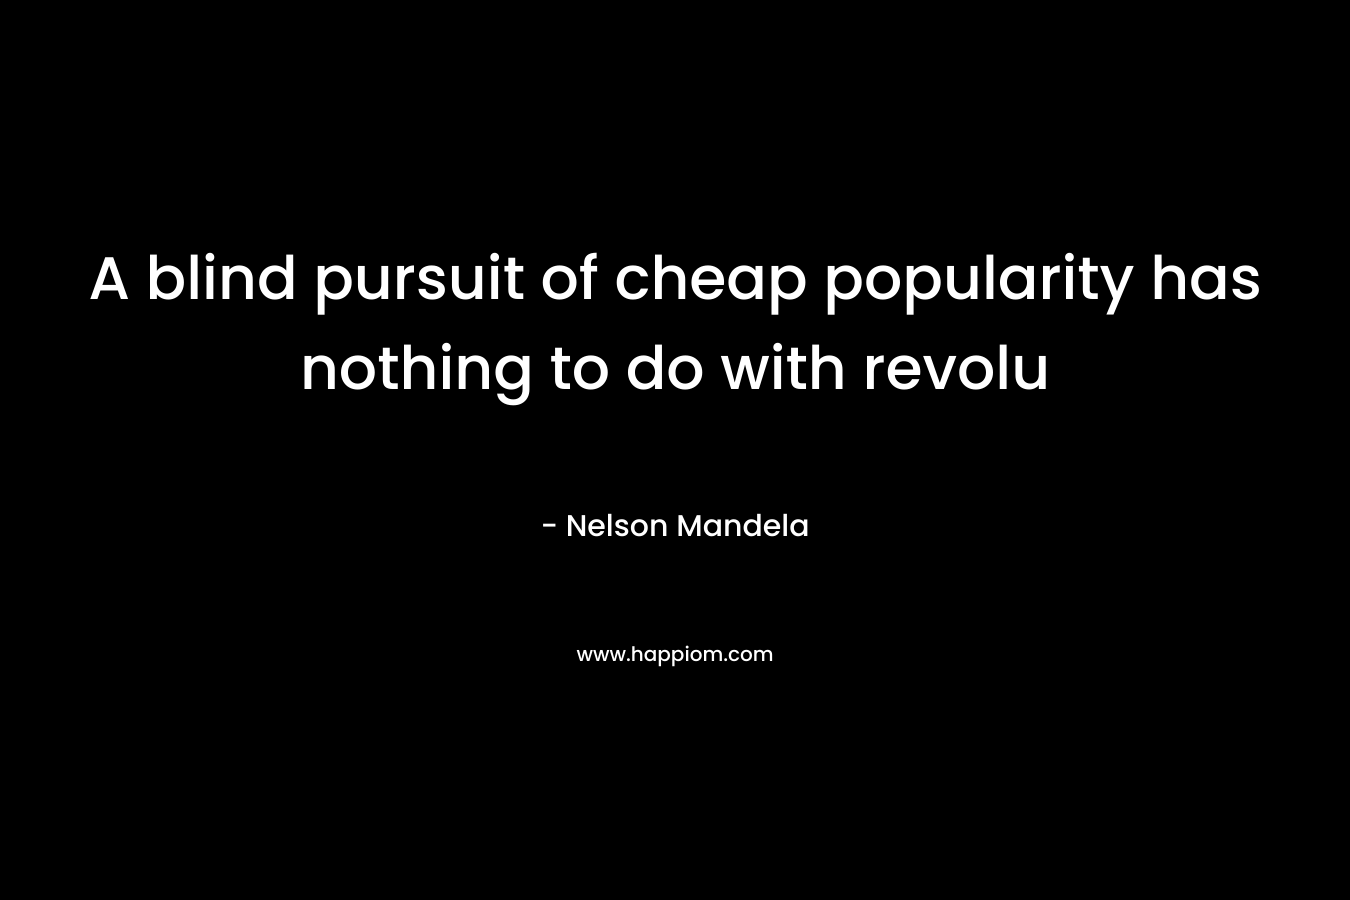 A blind pursuit of cheap popularity has nothing to do with revolu